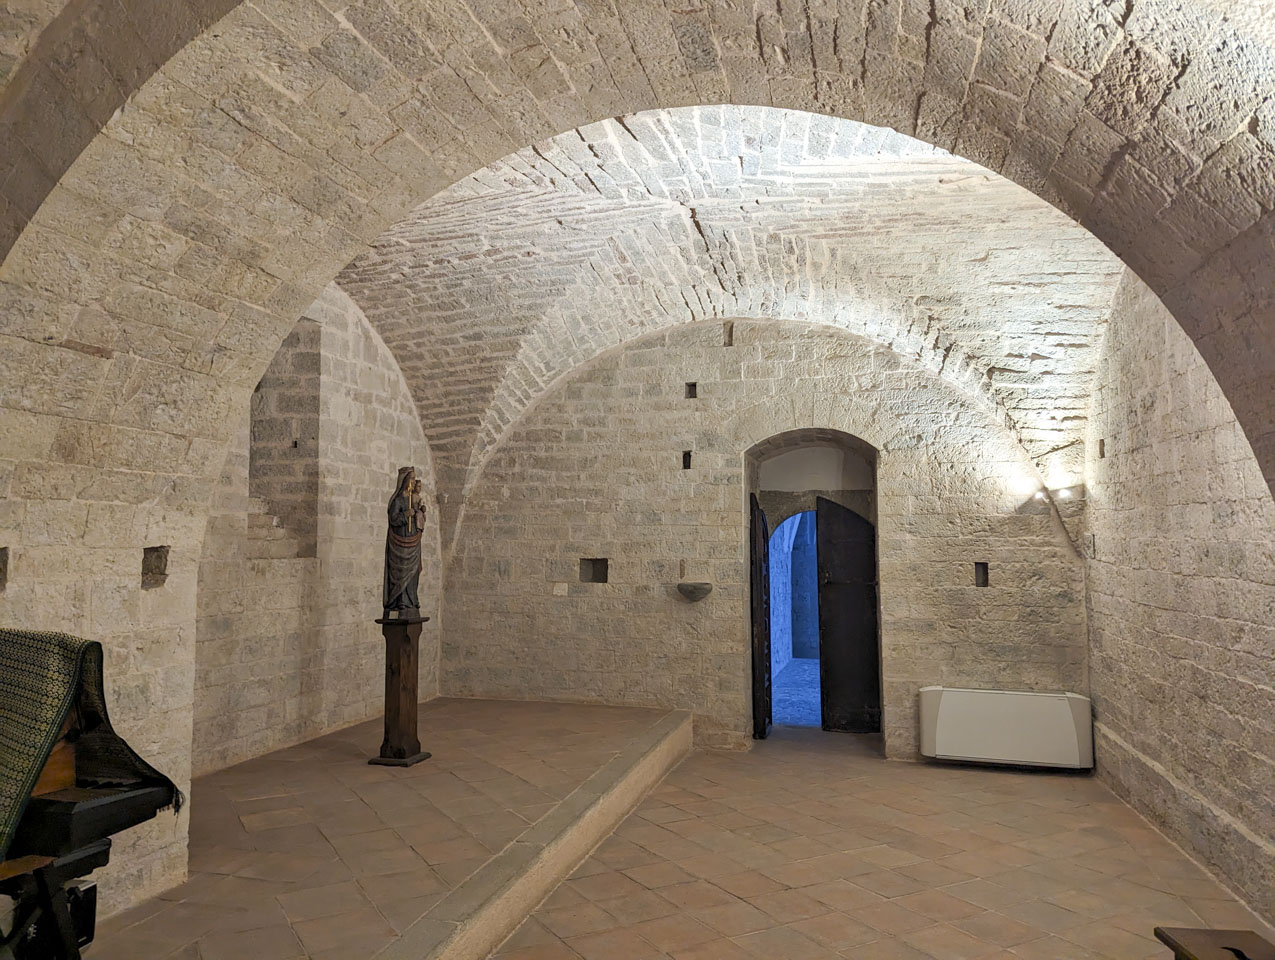 The entrance to the crypt of Fonte Avellana